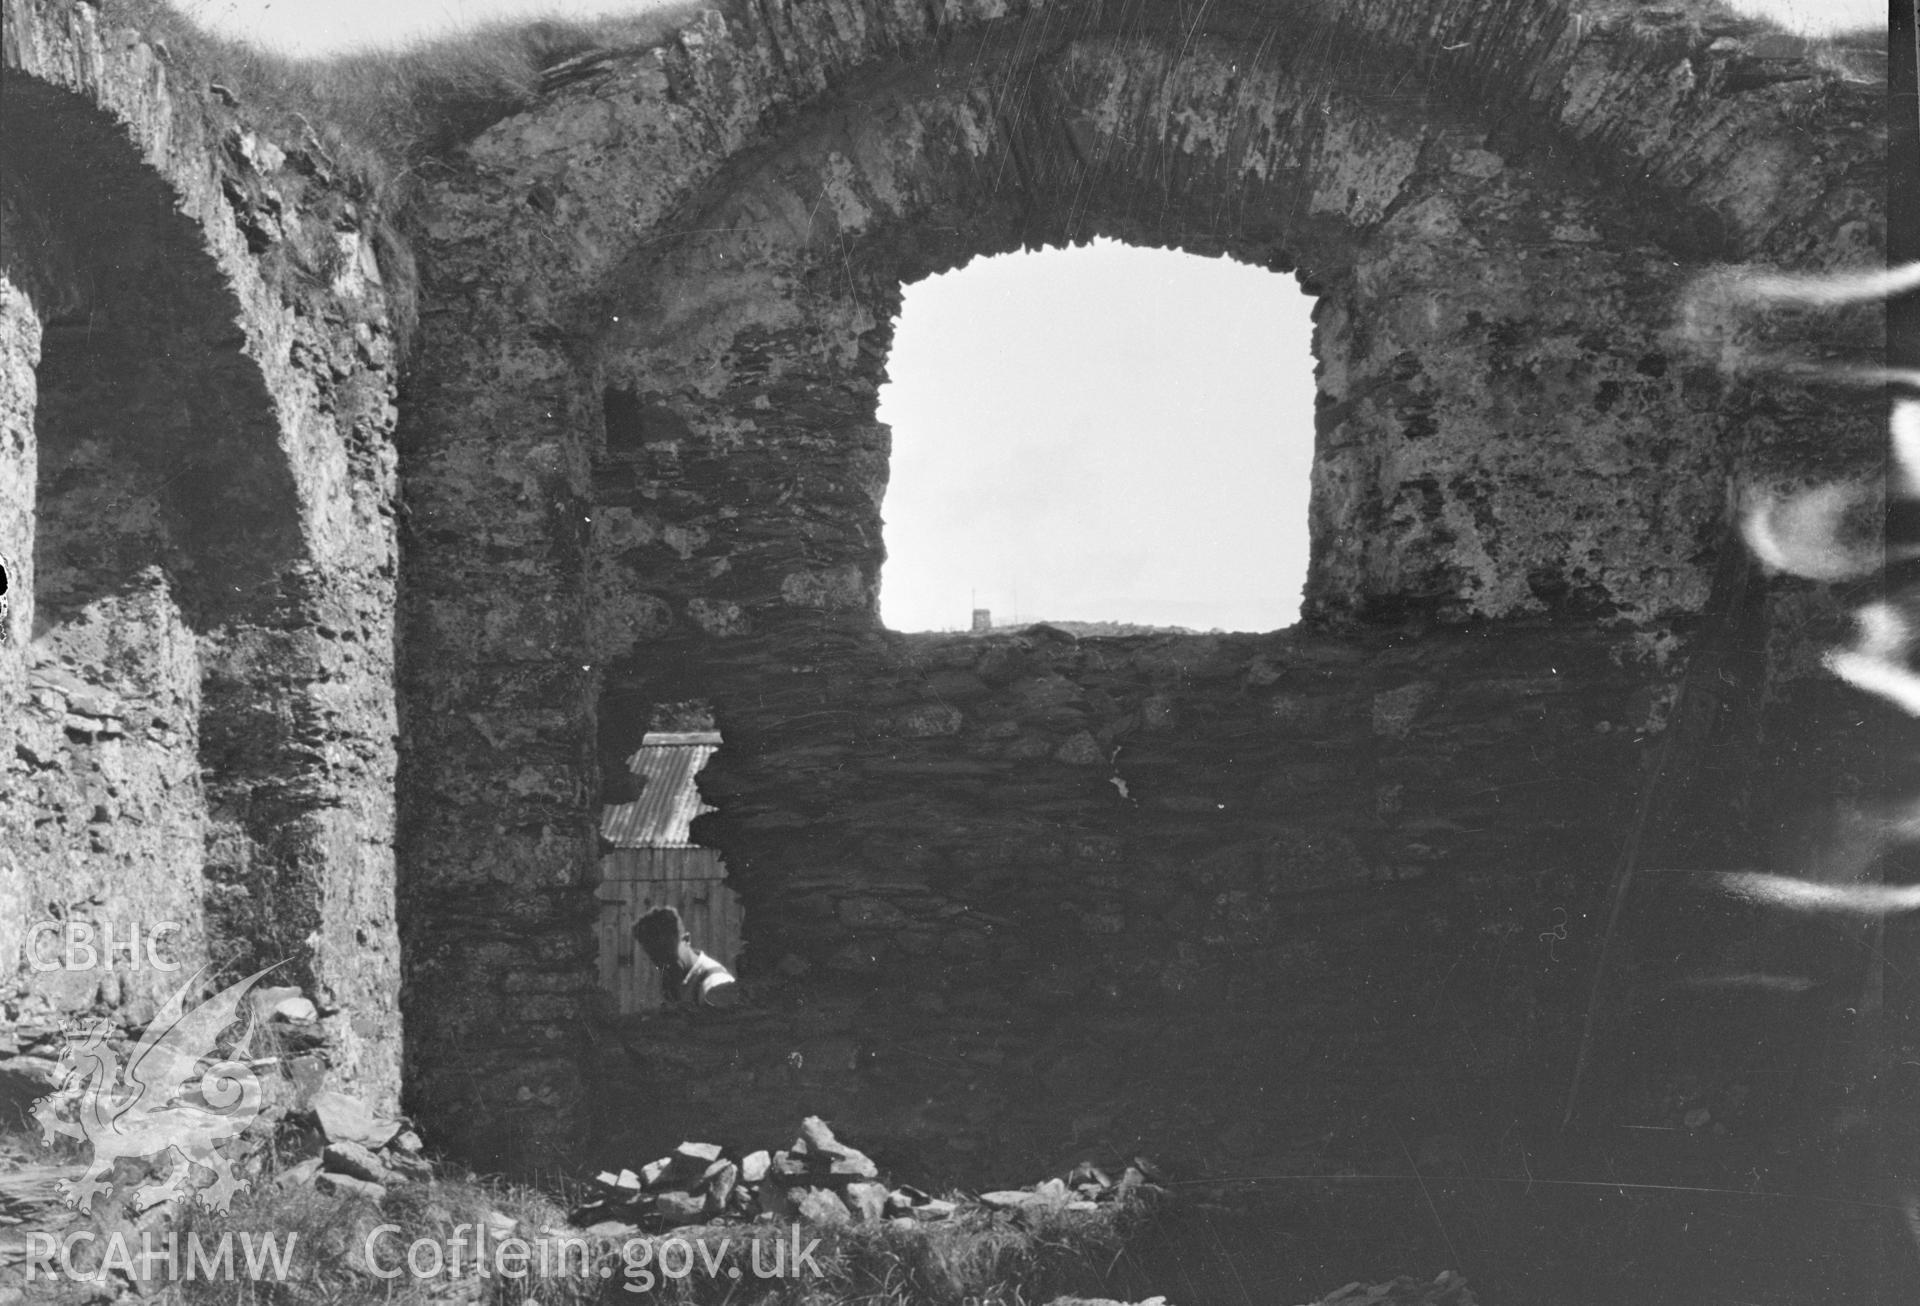 Digital copy of a black and white negative showing St Justinian's Chapel.